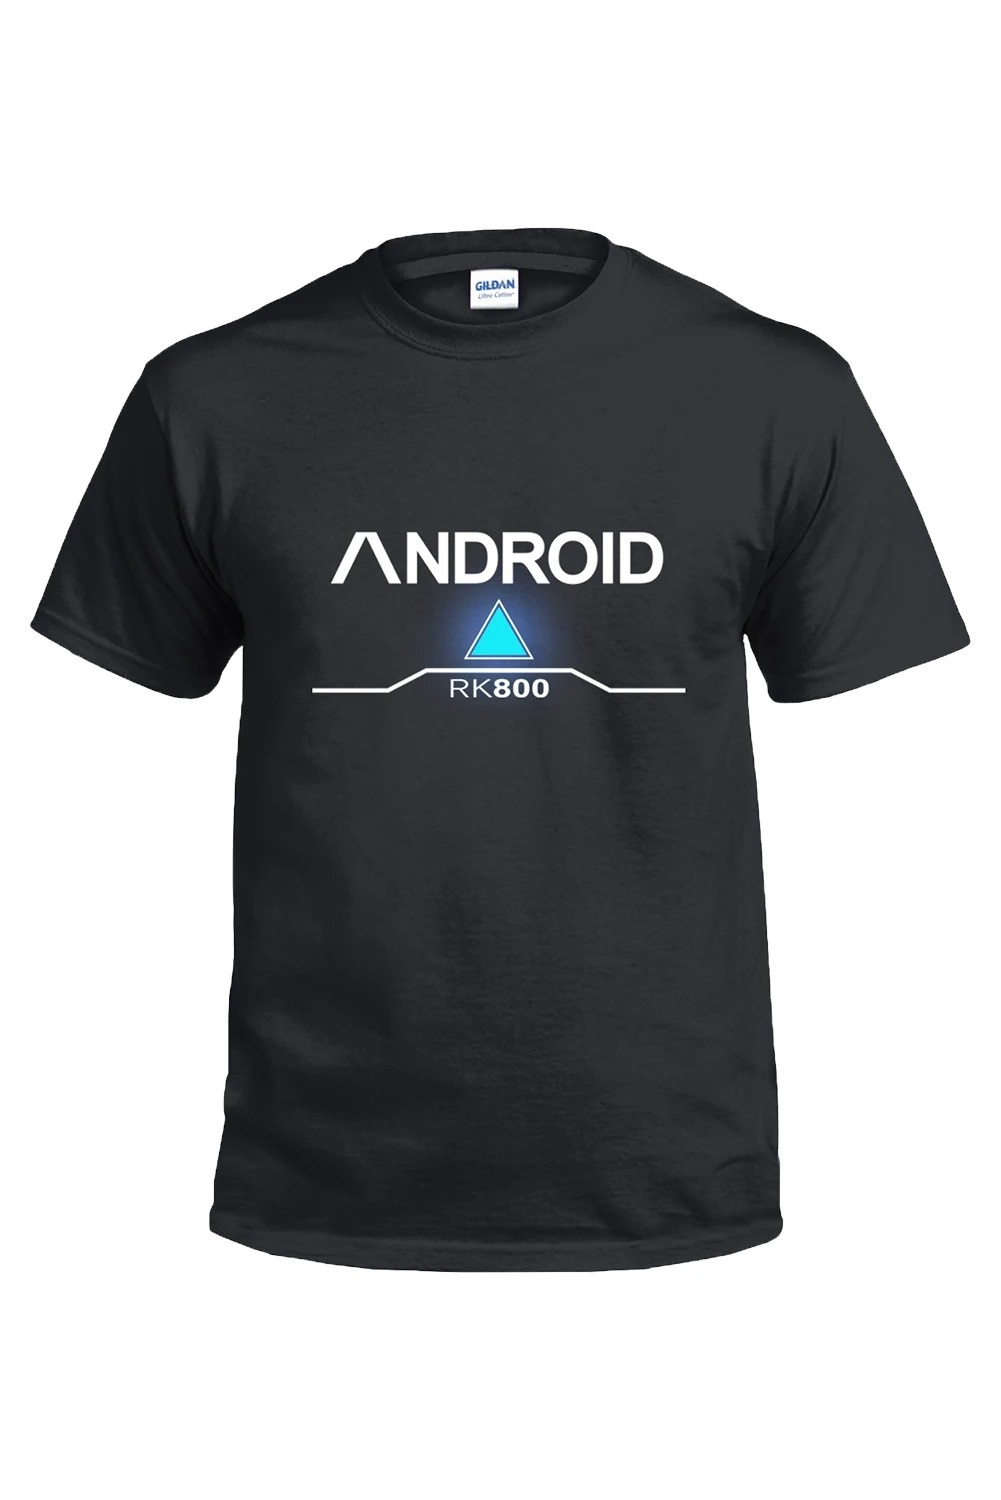 Detroit Become Human Connor RK800 T Shirt